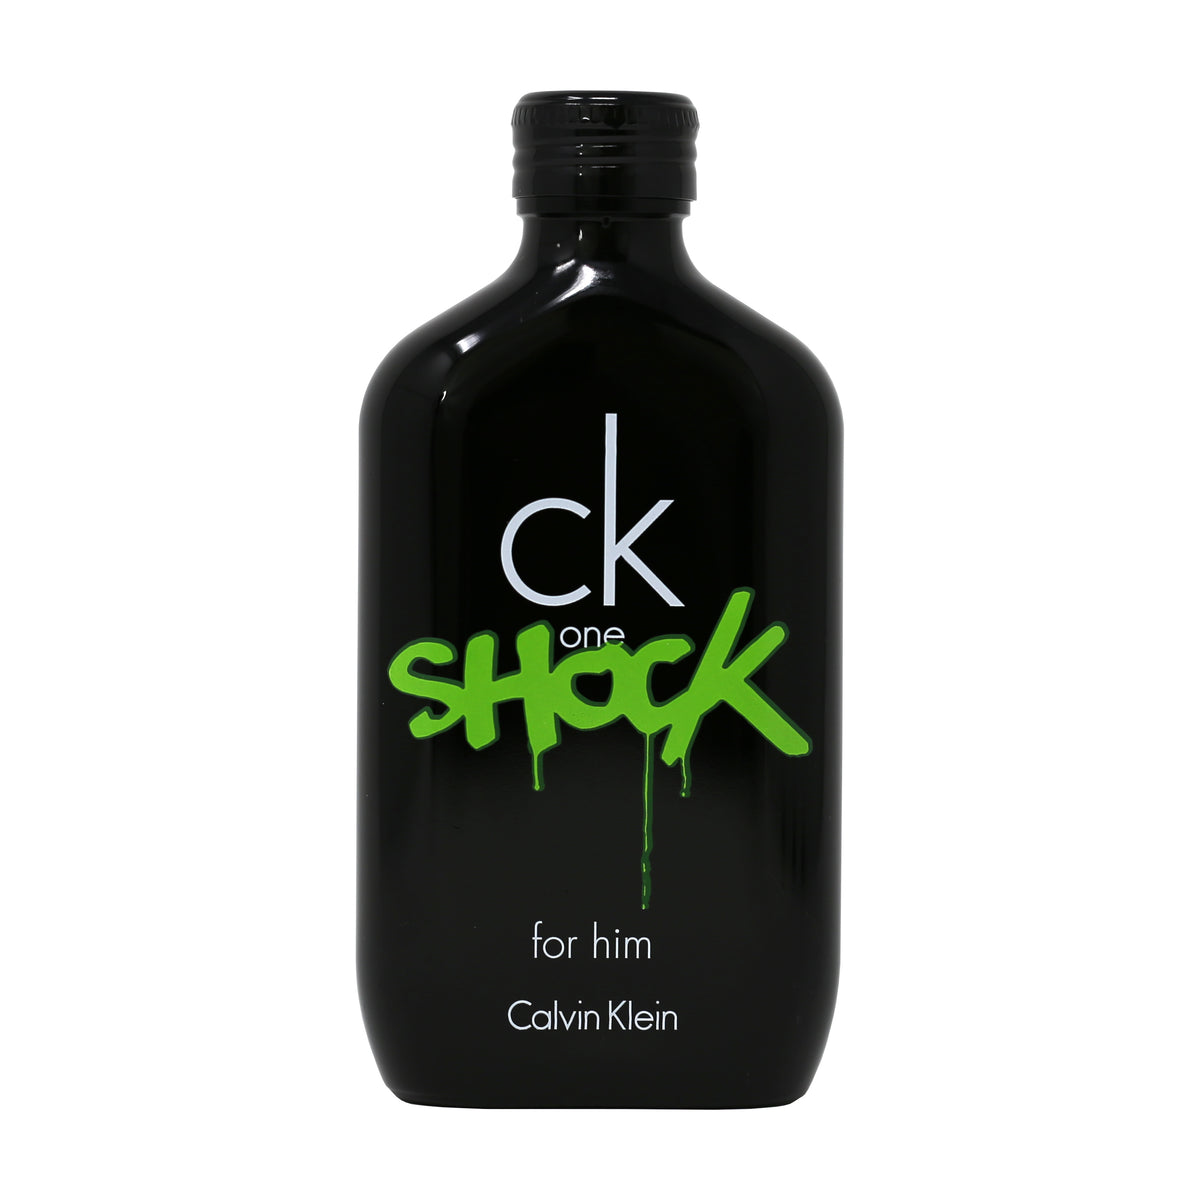 Ck One Shock Toilette Travel For Atomizer Perfume | Fragrance Him Klein Eau DecantX Calvin Sampler Samples de Size Scent and | by